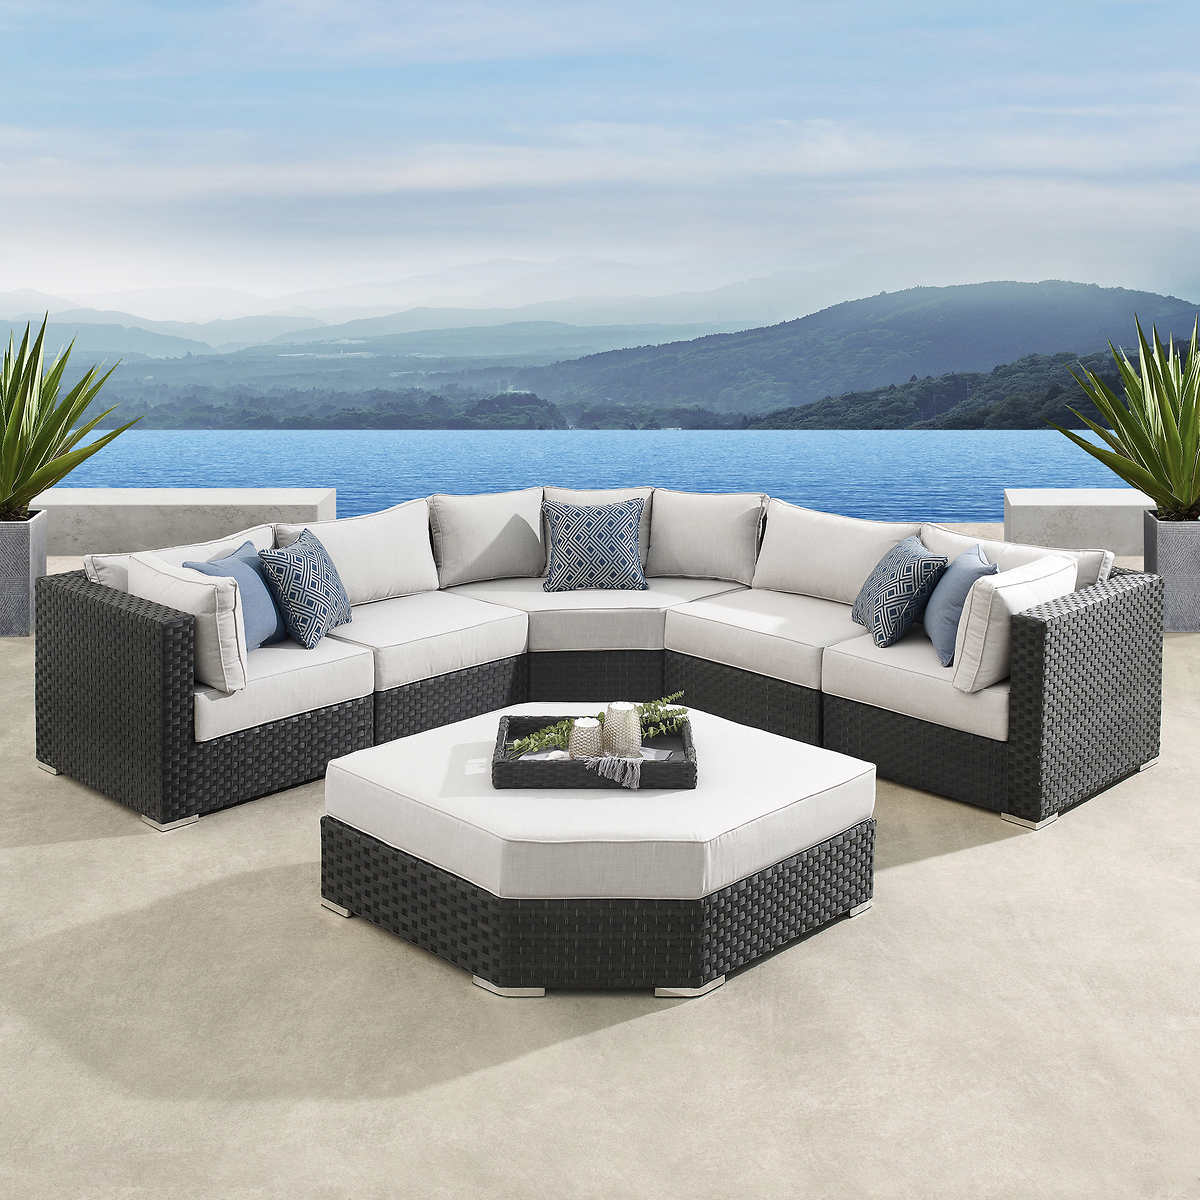 Sirio Highland 7 Piece Deep Seating Set, Oversized Patio Chairs With Ottoman Beds